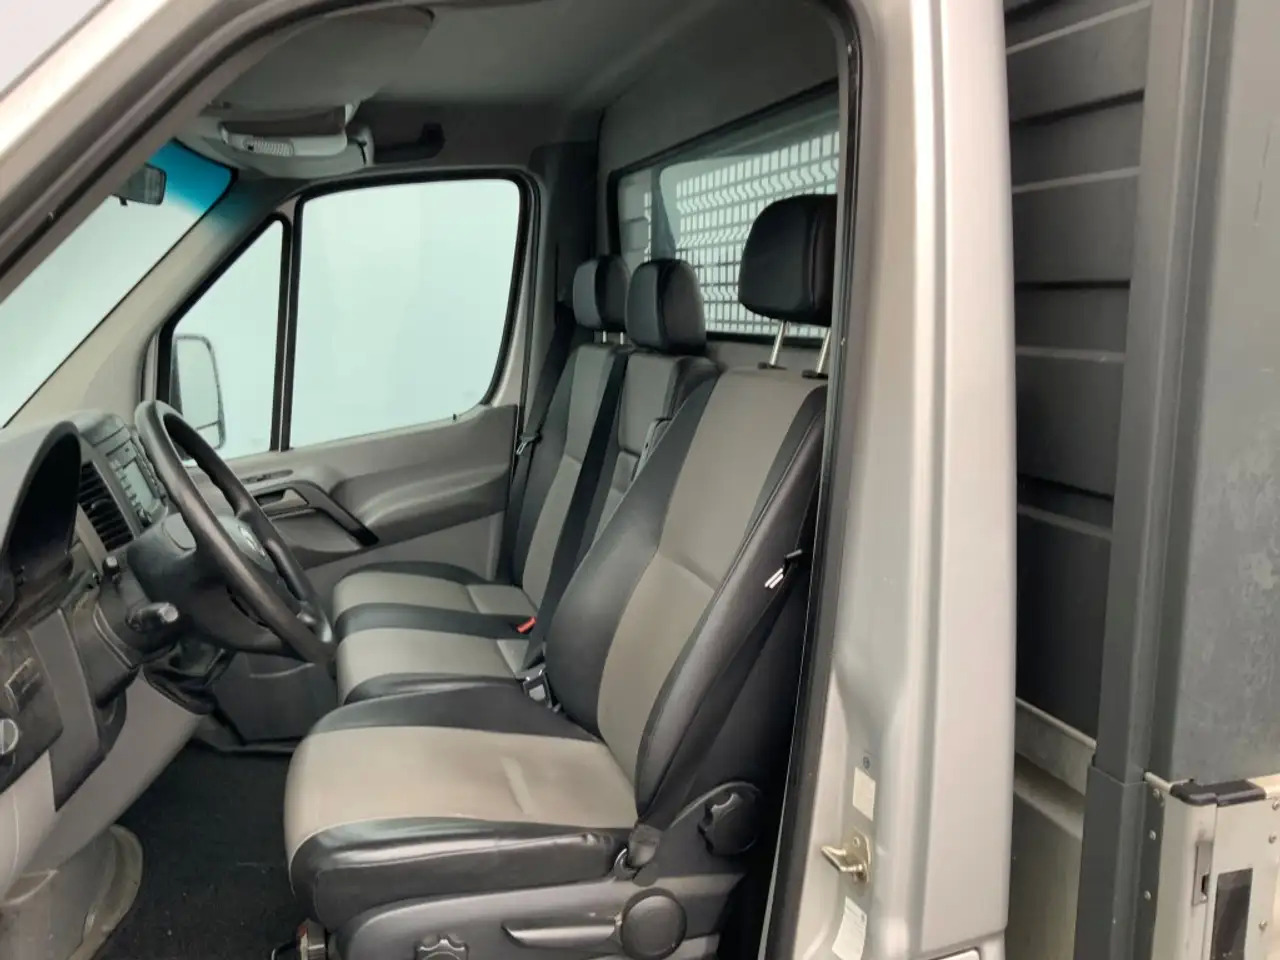 Leasing of Volkswagen Crafter 46 2.0 TDI L2H1 Pick Up Airco Navi Cruise 3 Zits E Volkswagen Crafter 46 2.0 TDI L2H1 Pick Up Airco Navi Cruise 3 Zits E: picture 15